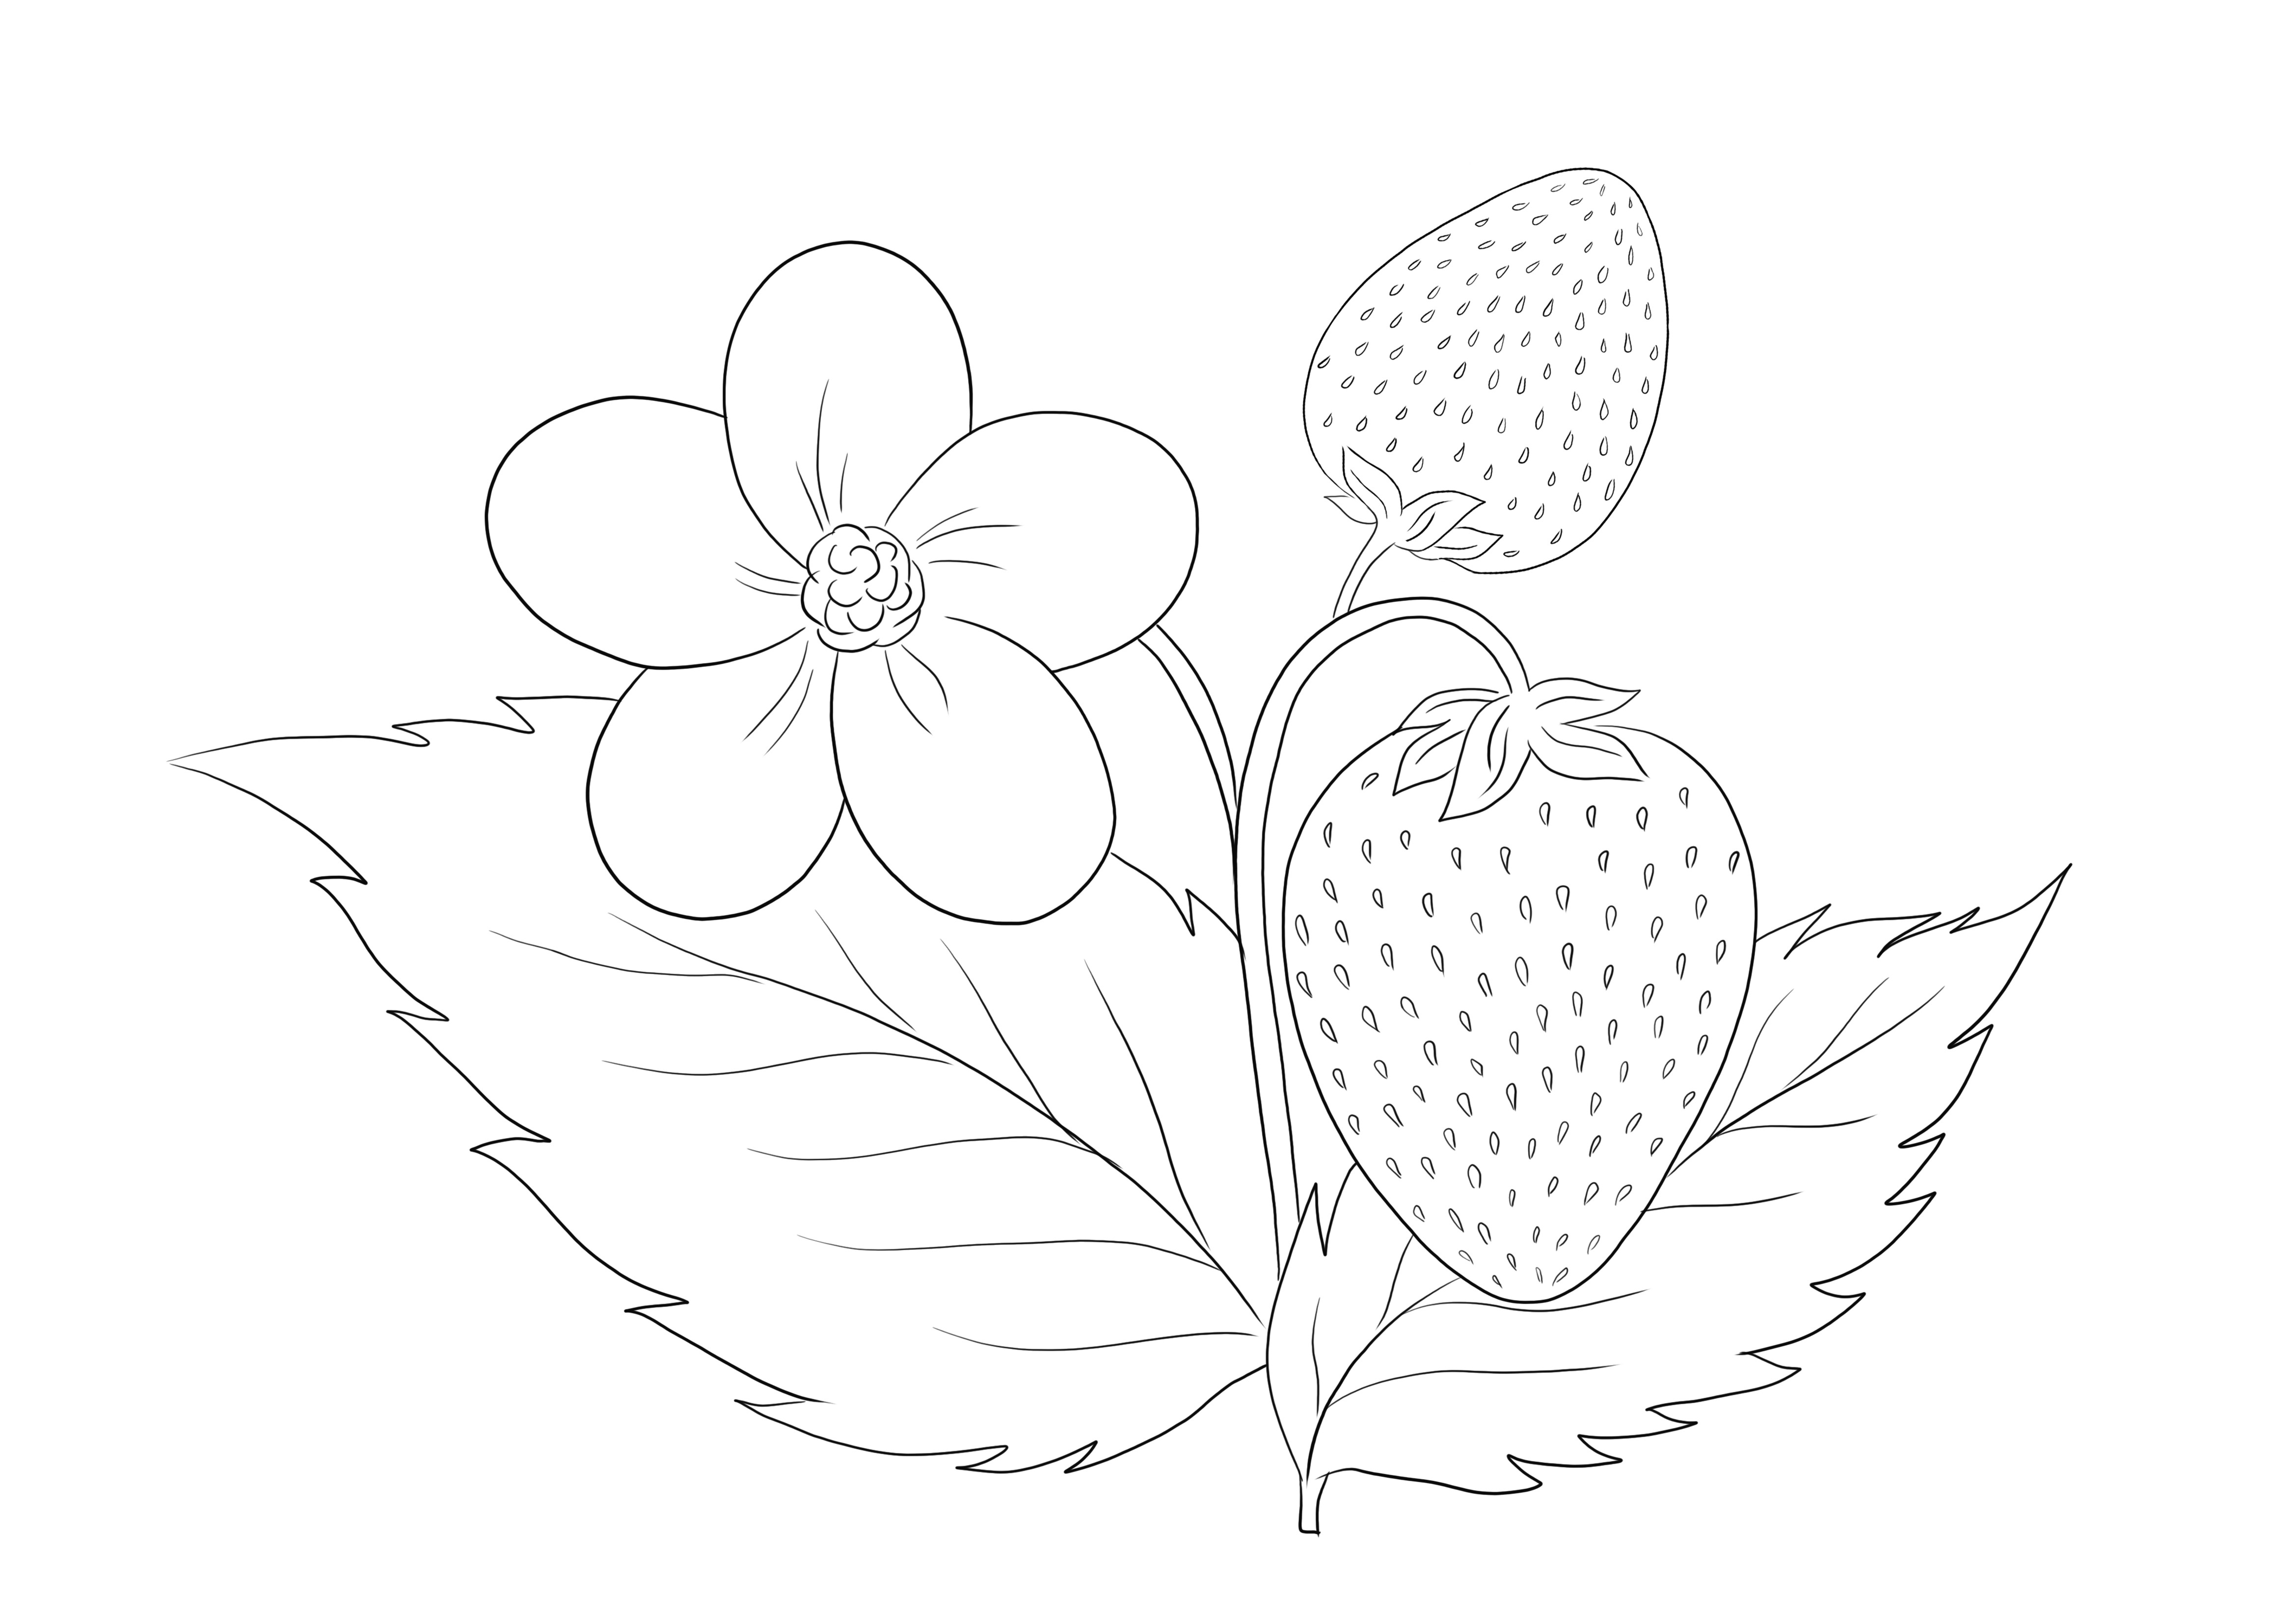 Simple to color a Strawberry Plant free to download or save for later and color for kids